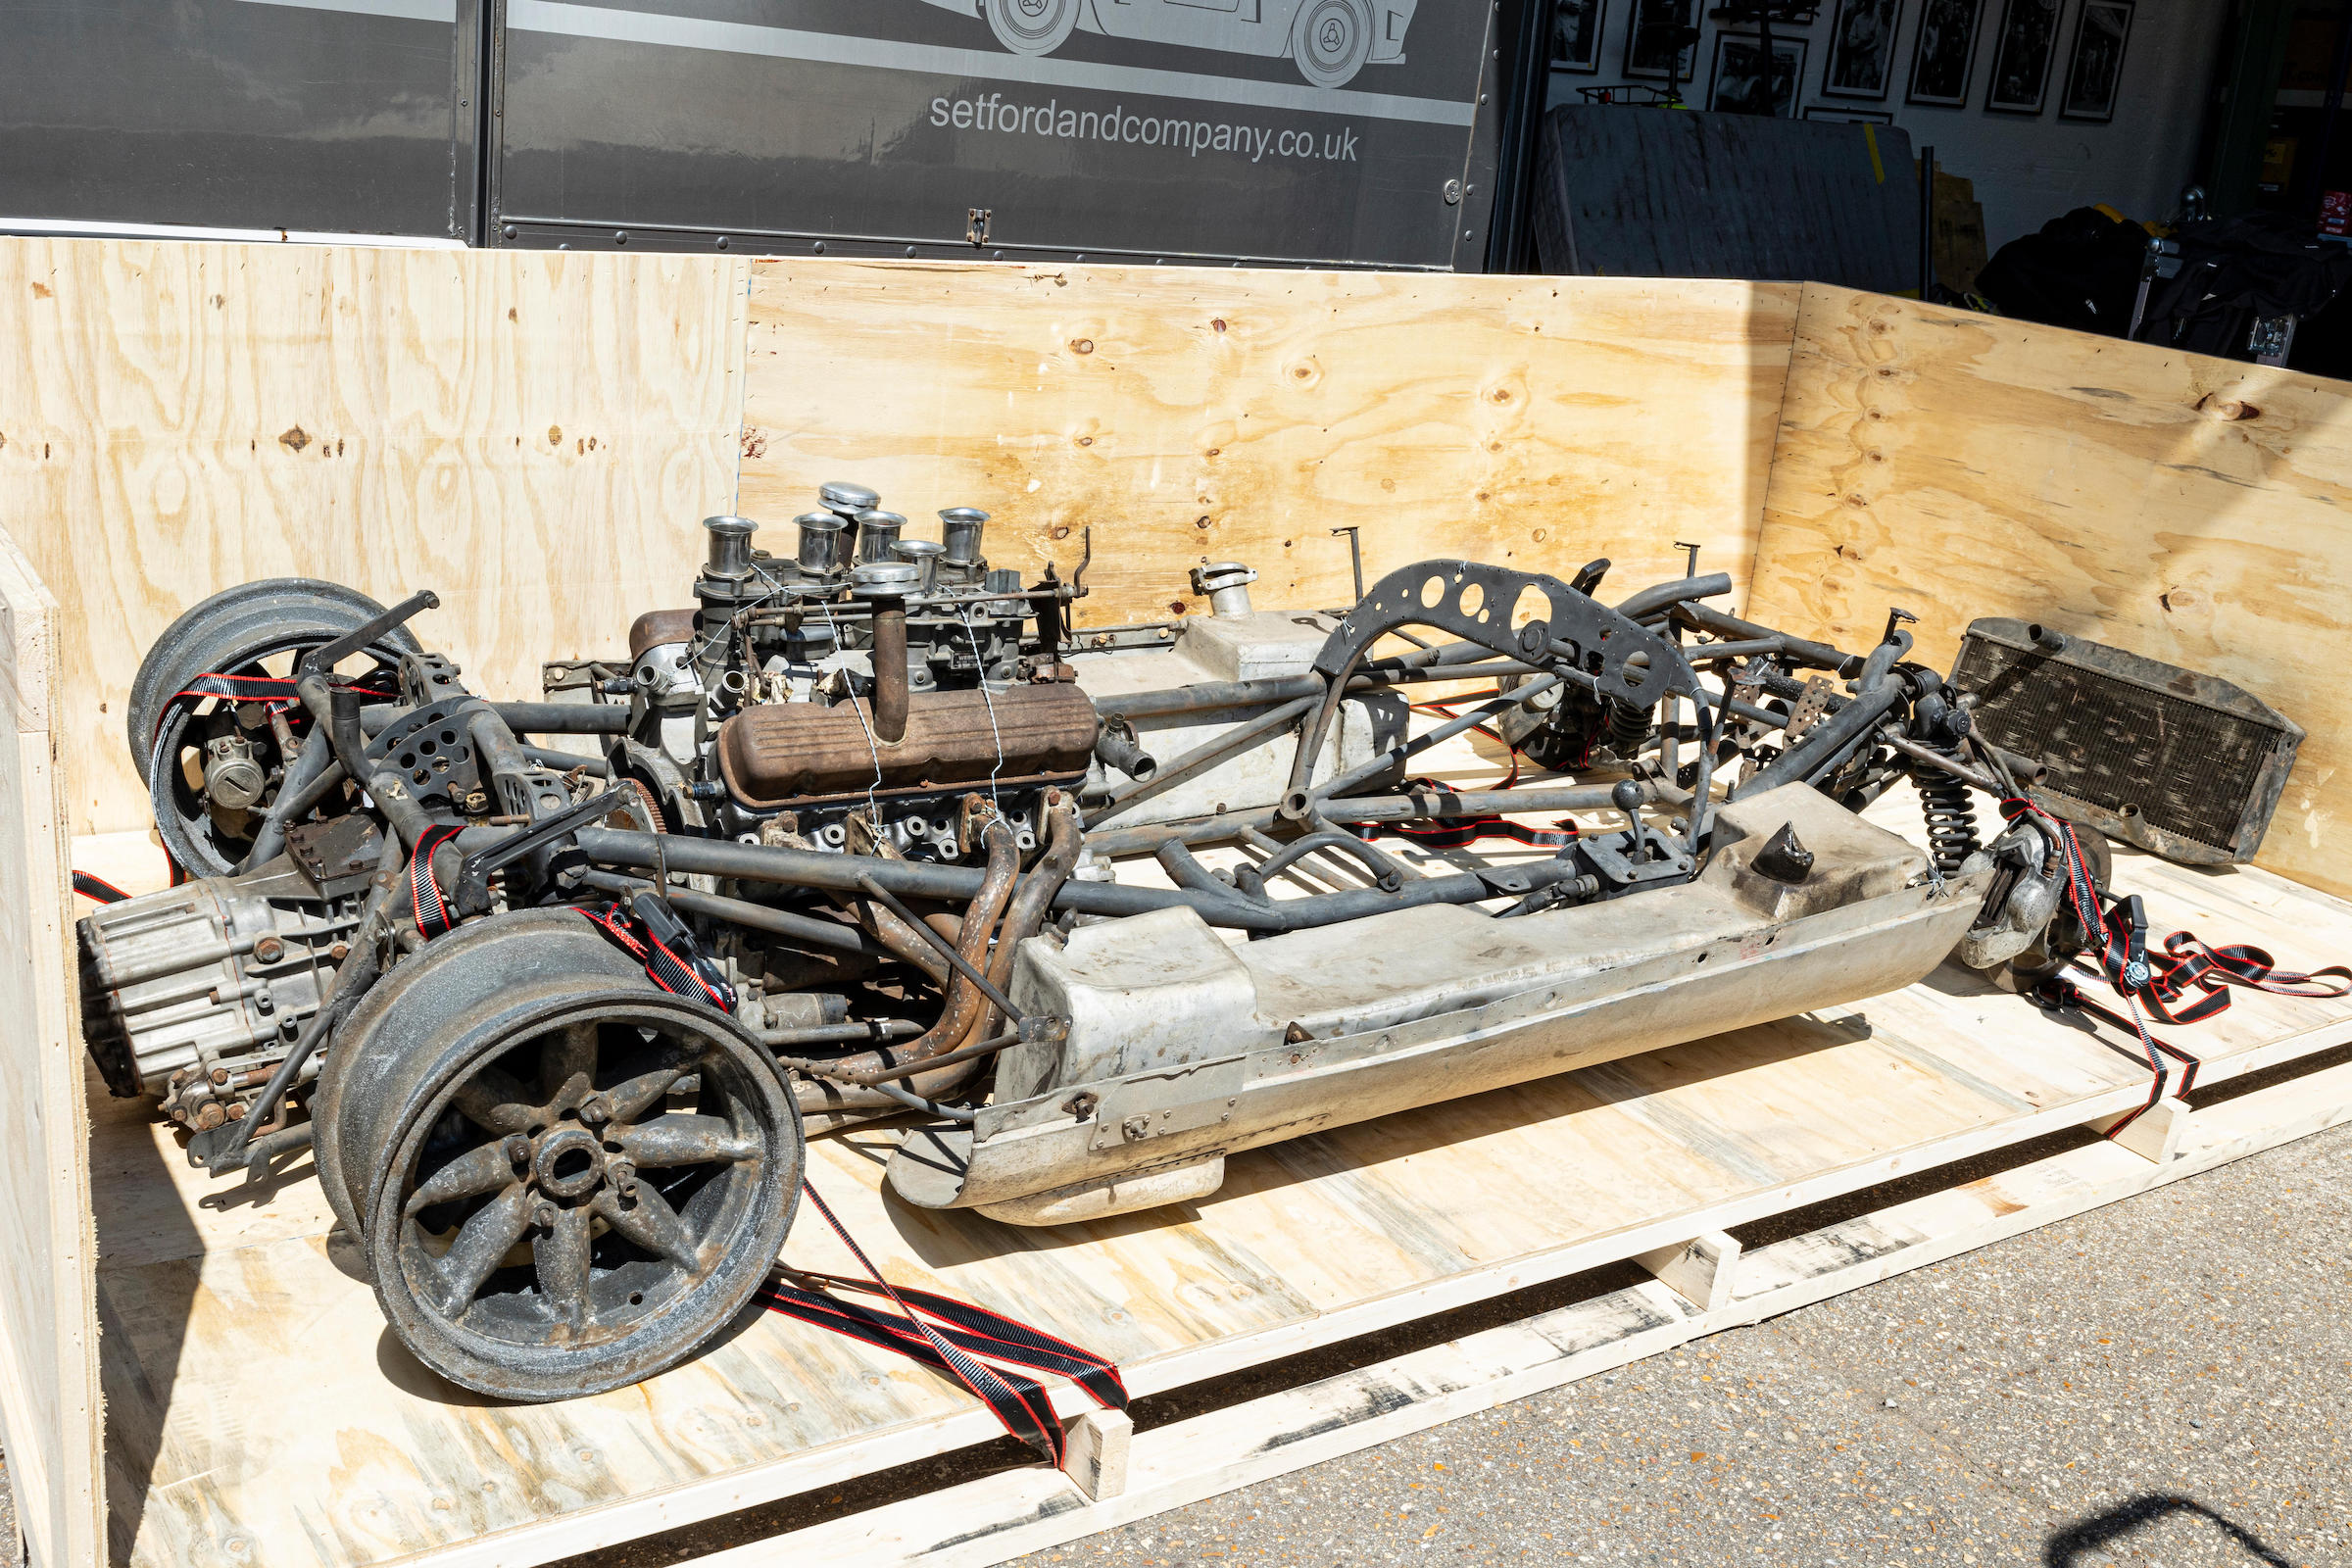 £911,000 for a pile of rusty race-car parts? Not crazy, and here’s why